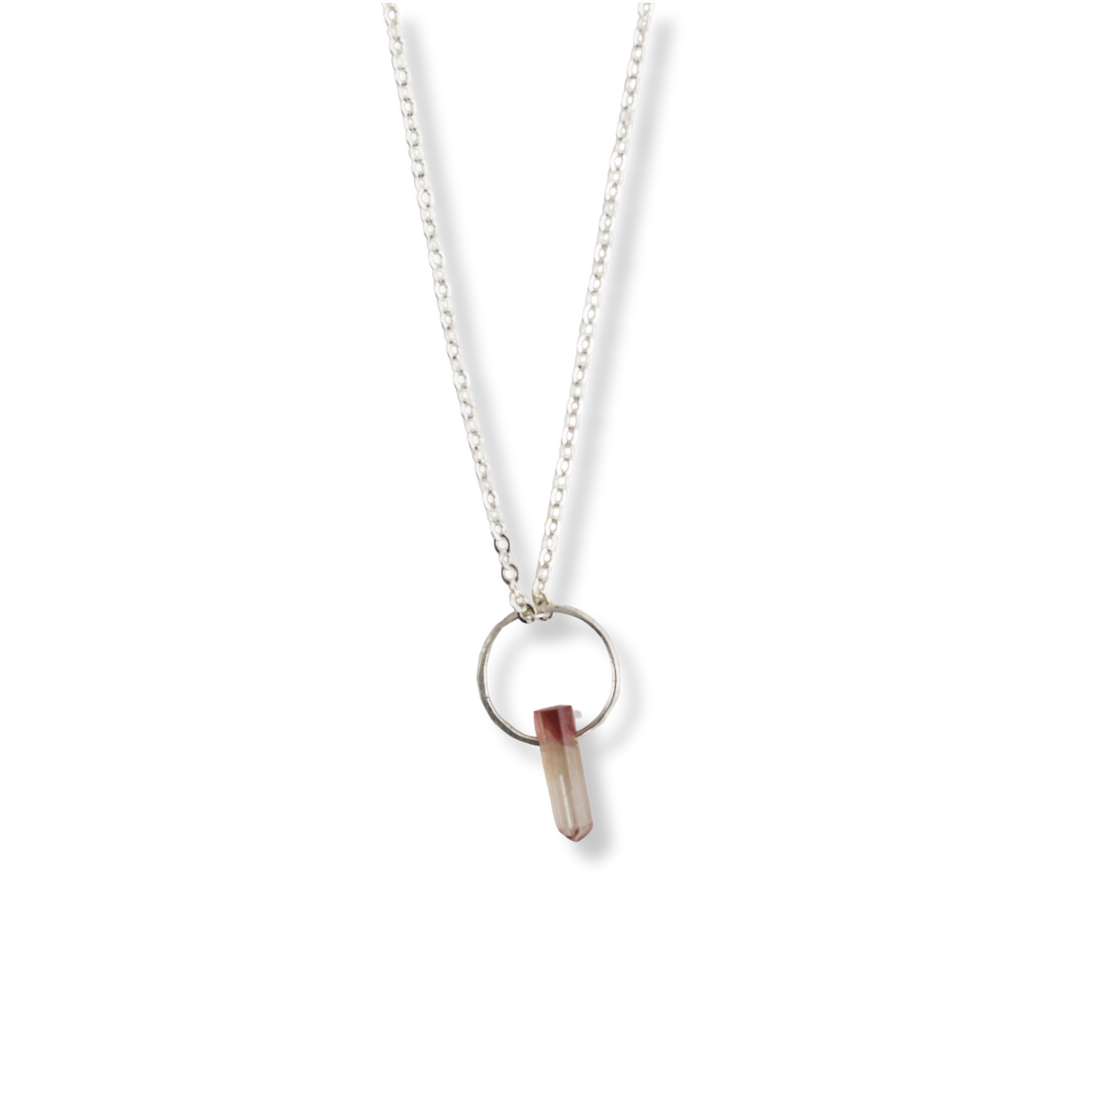 Tourmaline Gemstone Point Necklace - Chocolate and Steel Sterling Silver / Pink Tourmaline